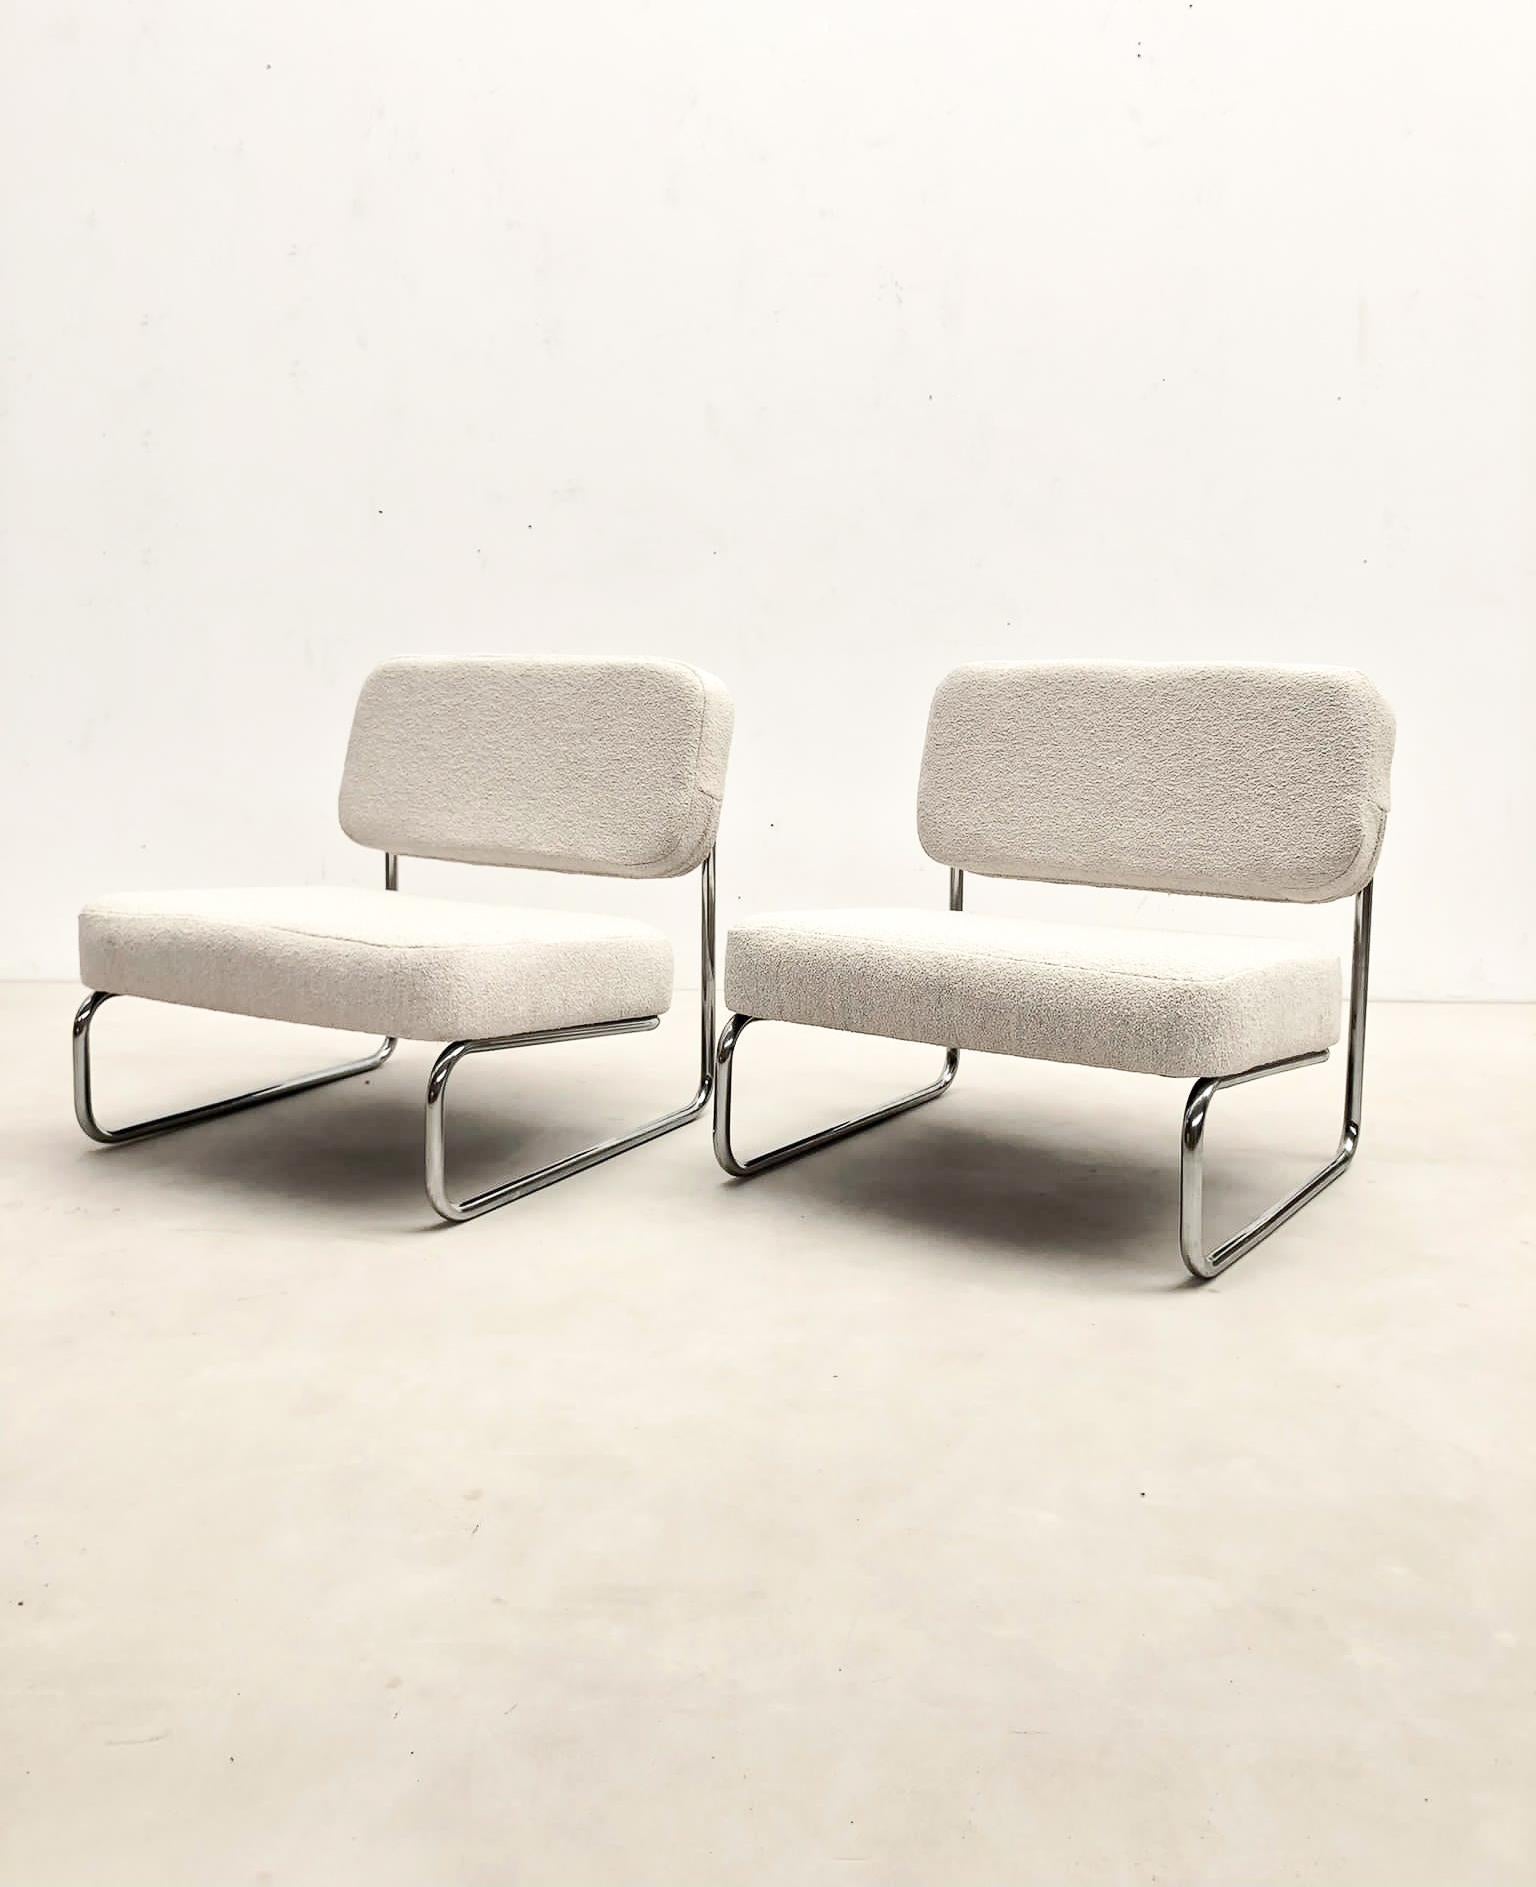 Mid-20th Century Mid-Century Modern Pair of Chairs, France, 1960s, New Upholstery